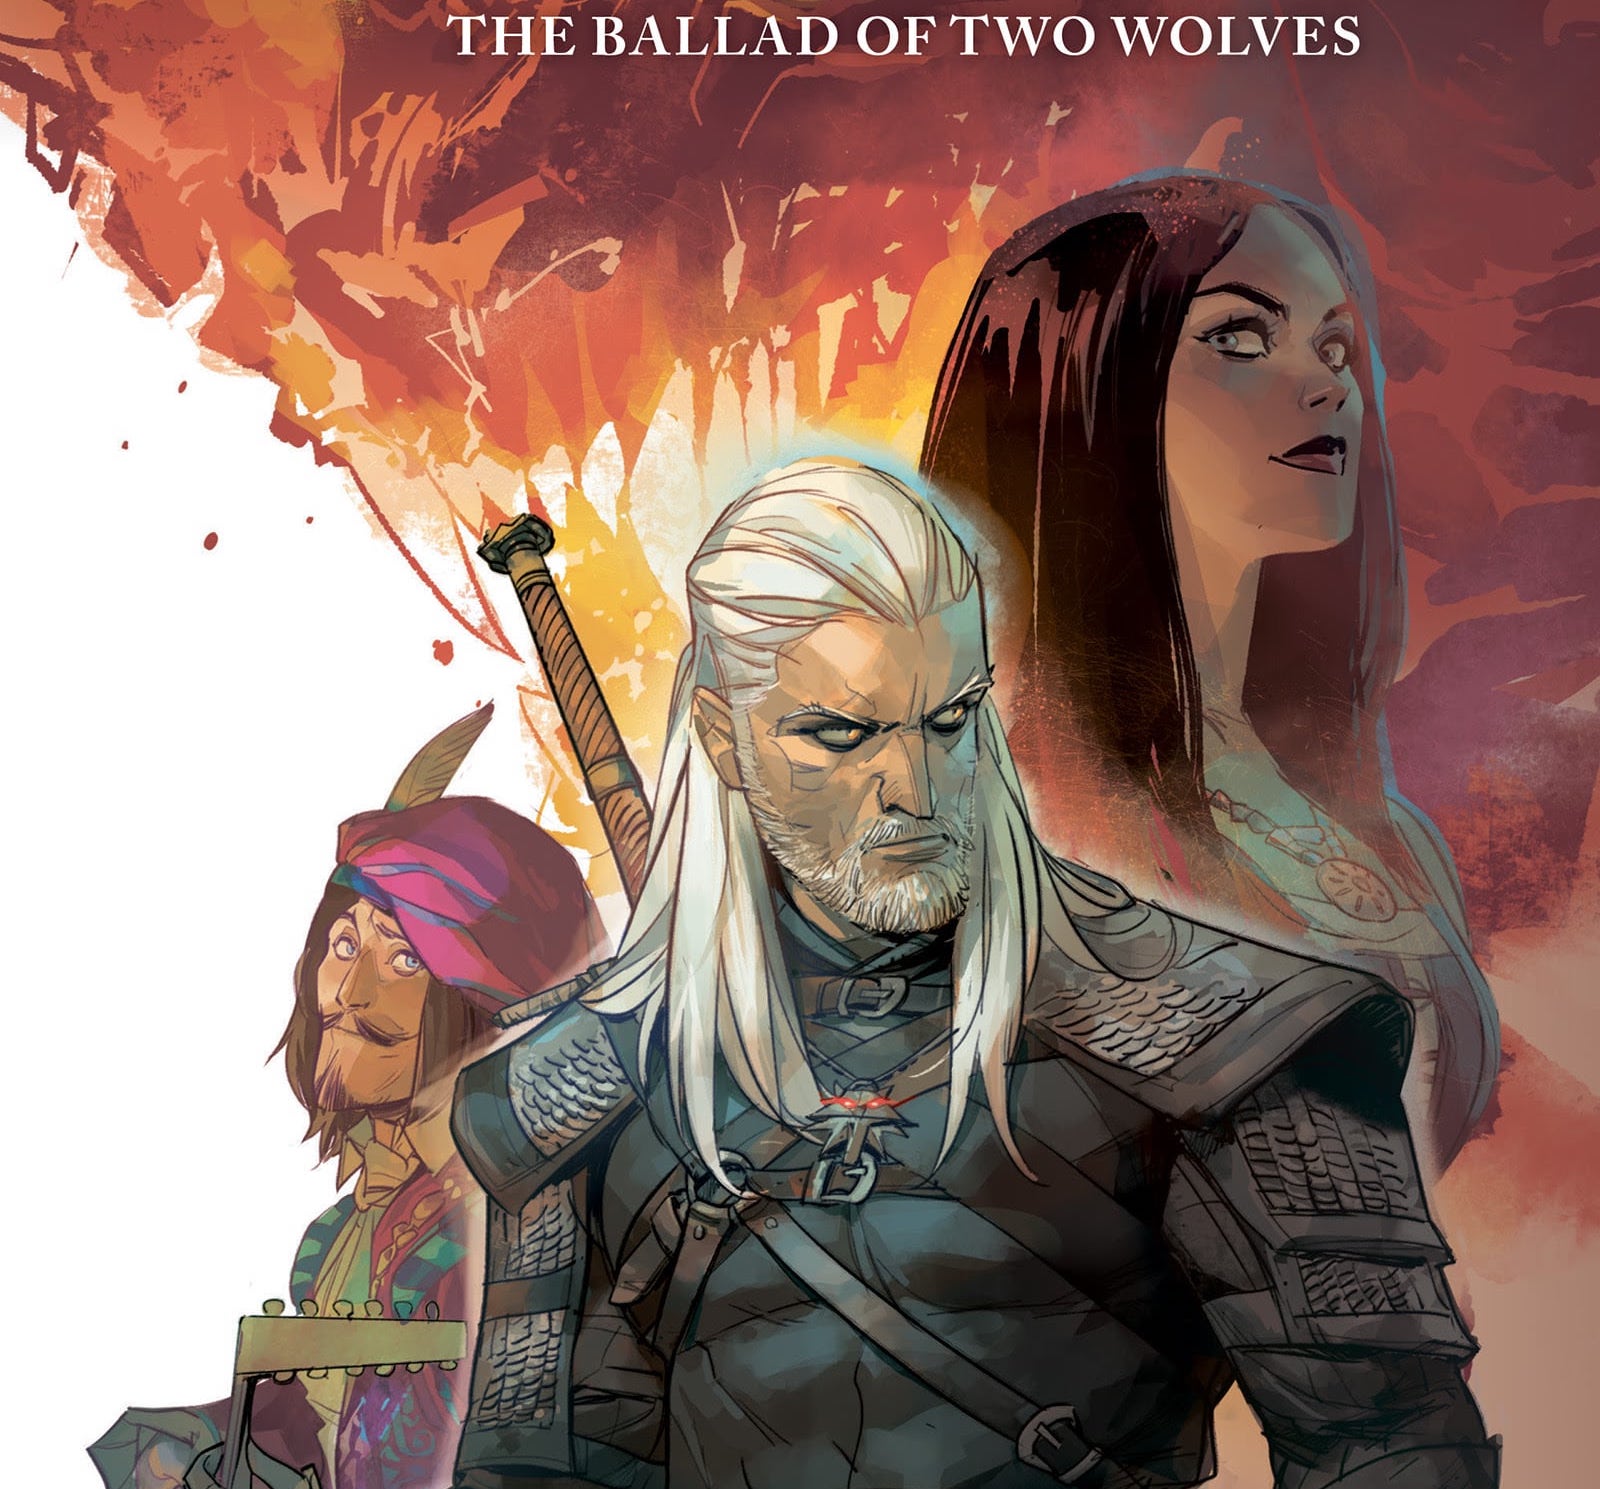 Dark Horse and CD Projekt Red launch new 'The Witcher' comics miniseries